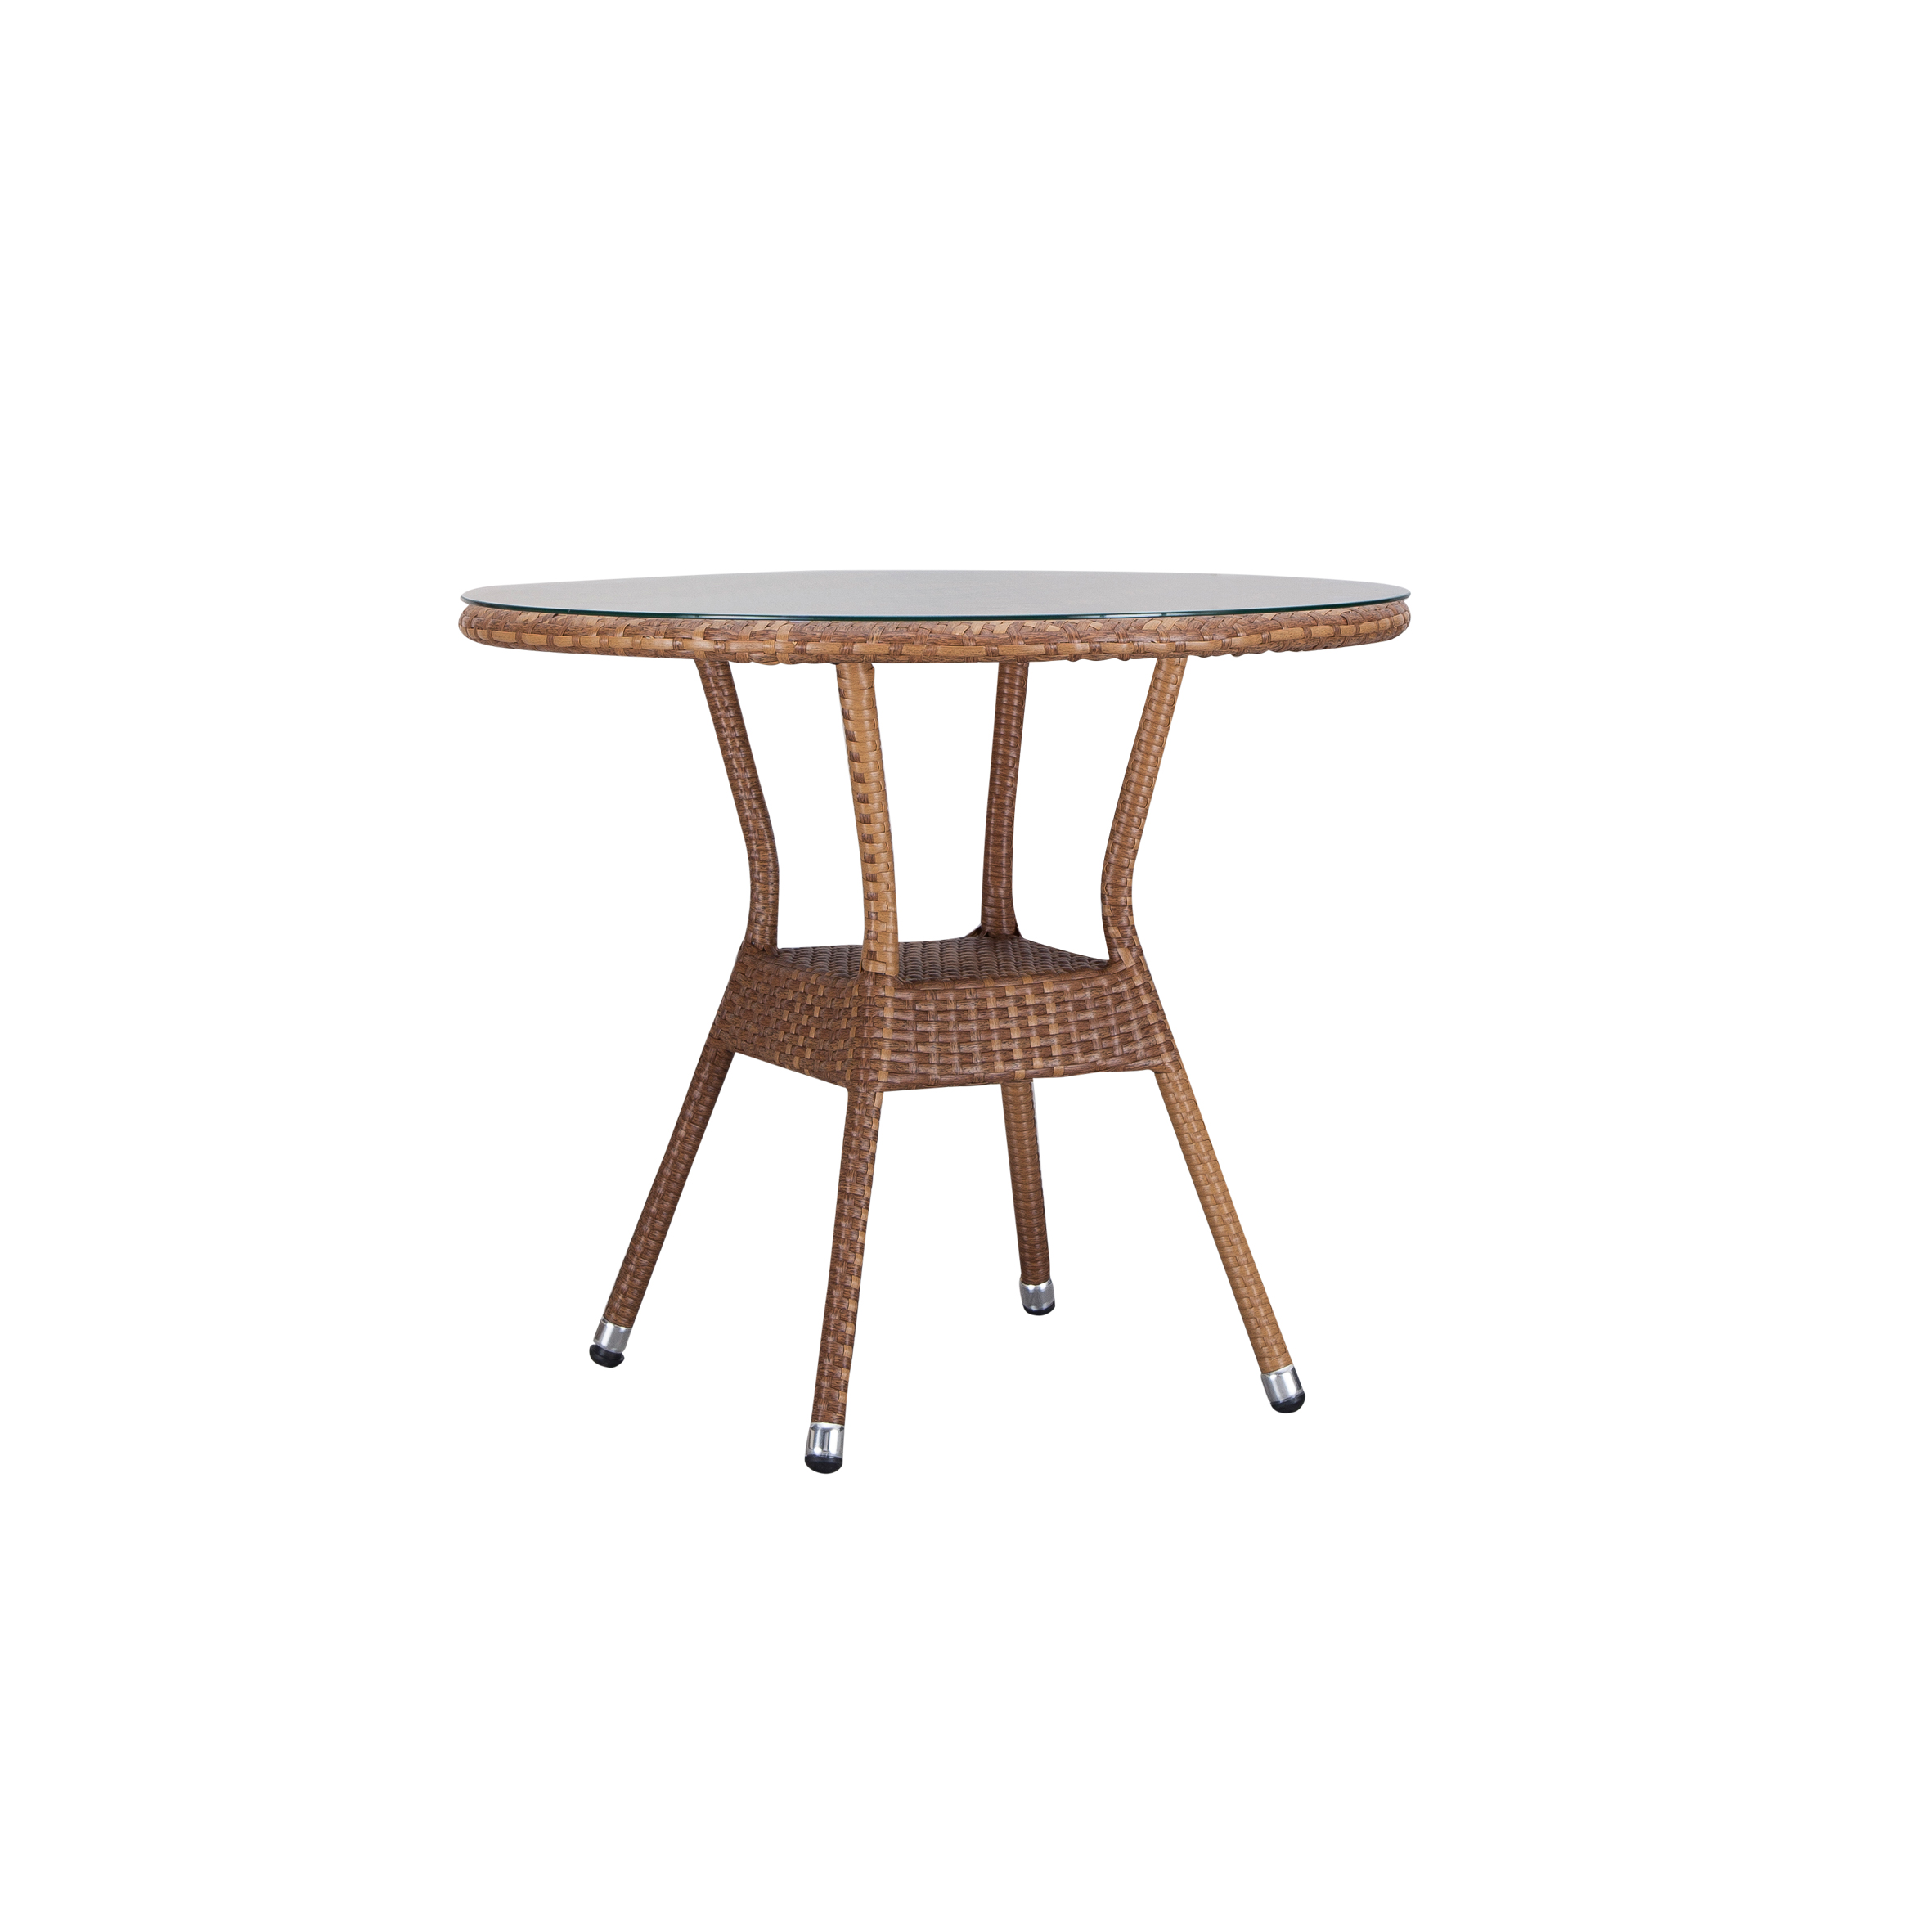 Angus rattan dining table S1